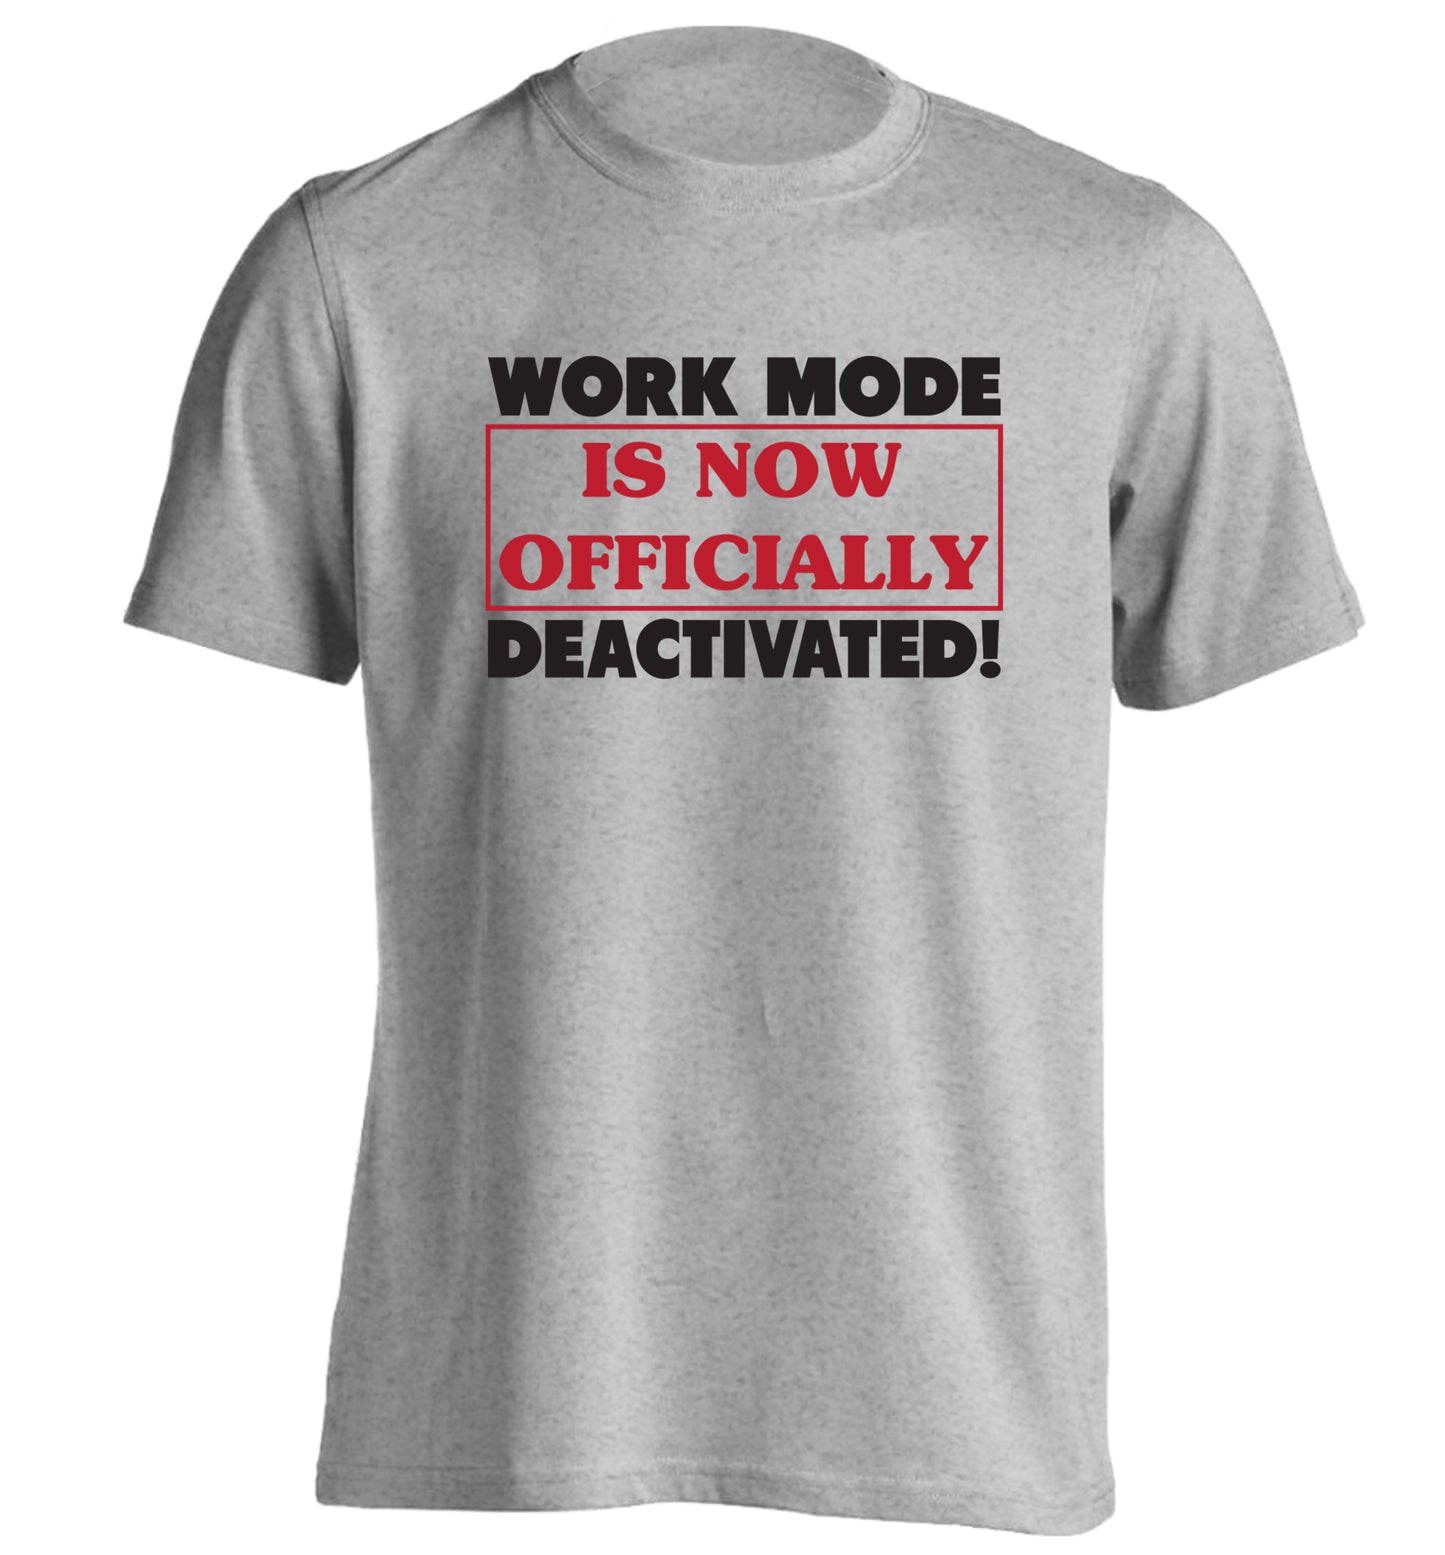 Work mode is now officially deactivated adults unisex grey Tshirt 2XL